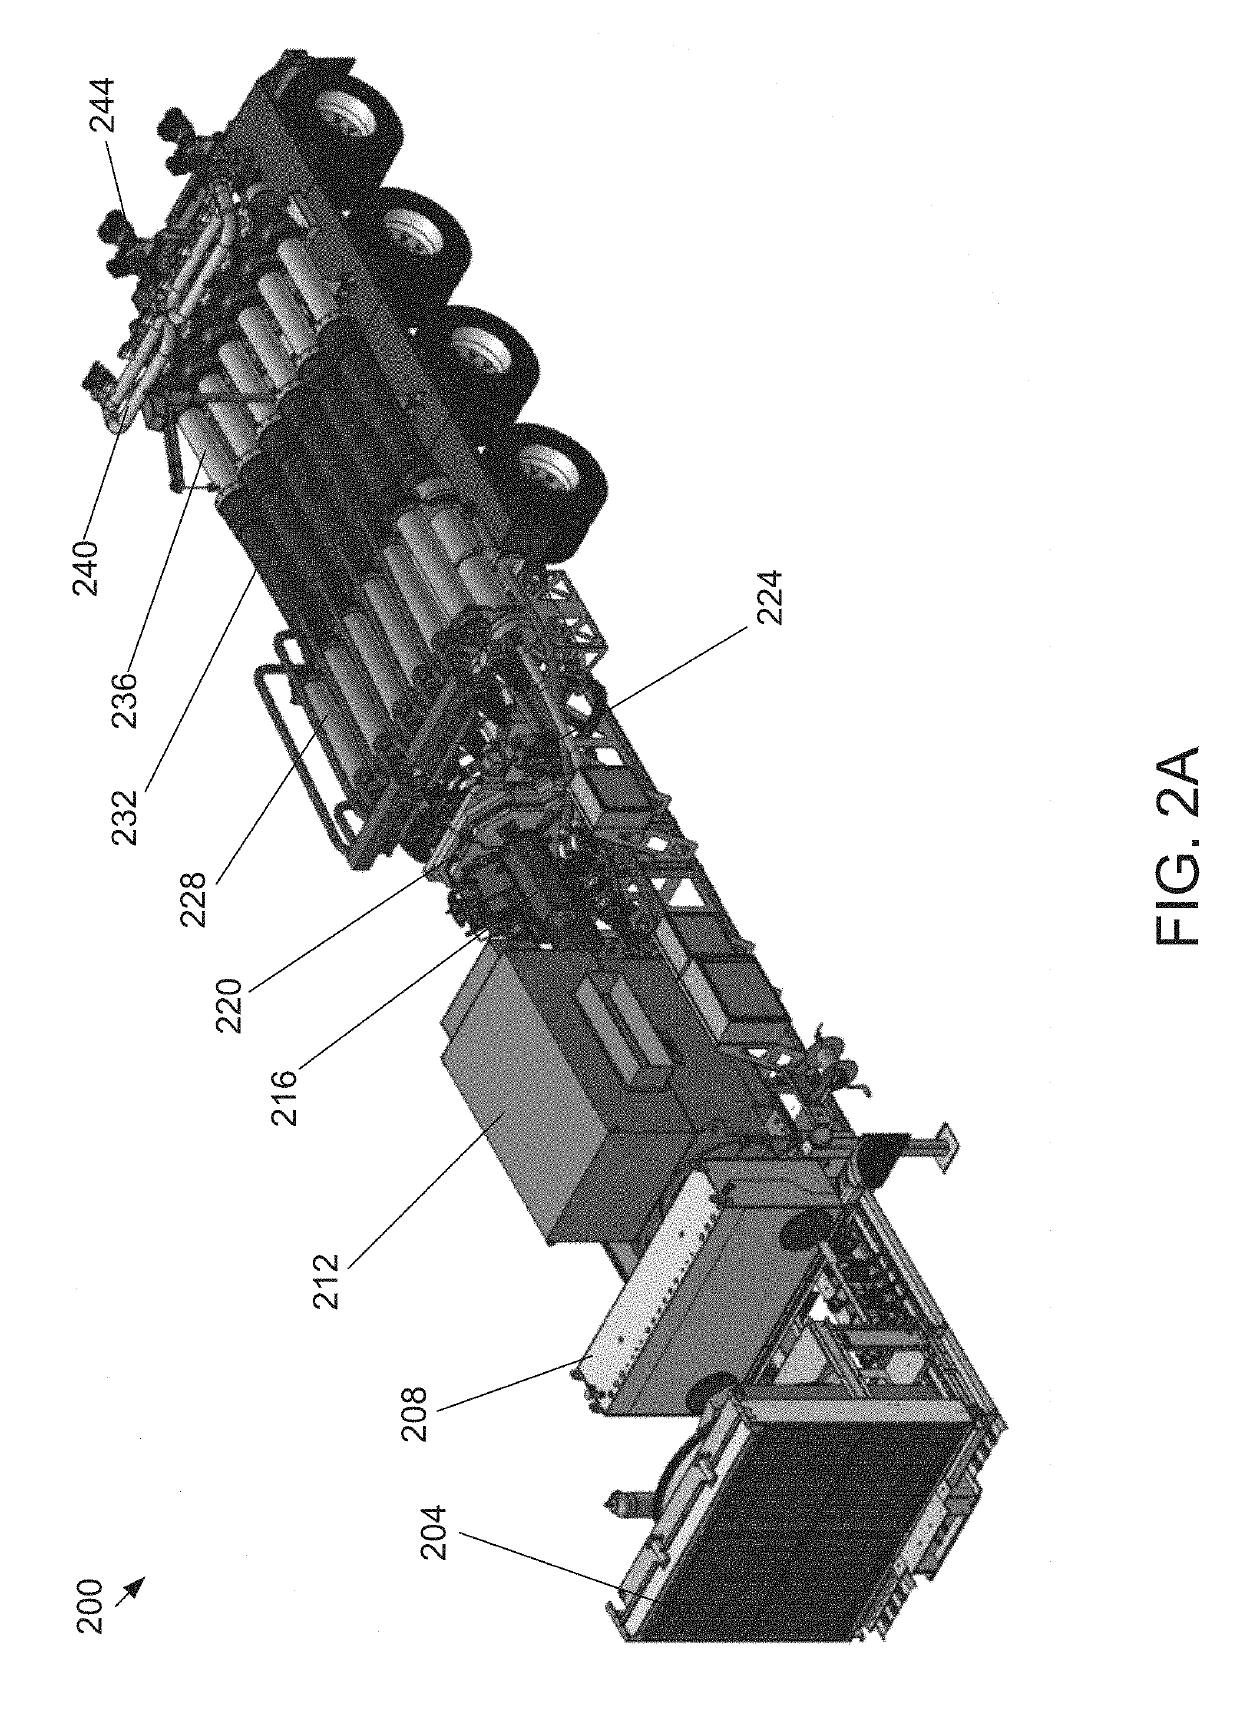 Well service pump power system and methods